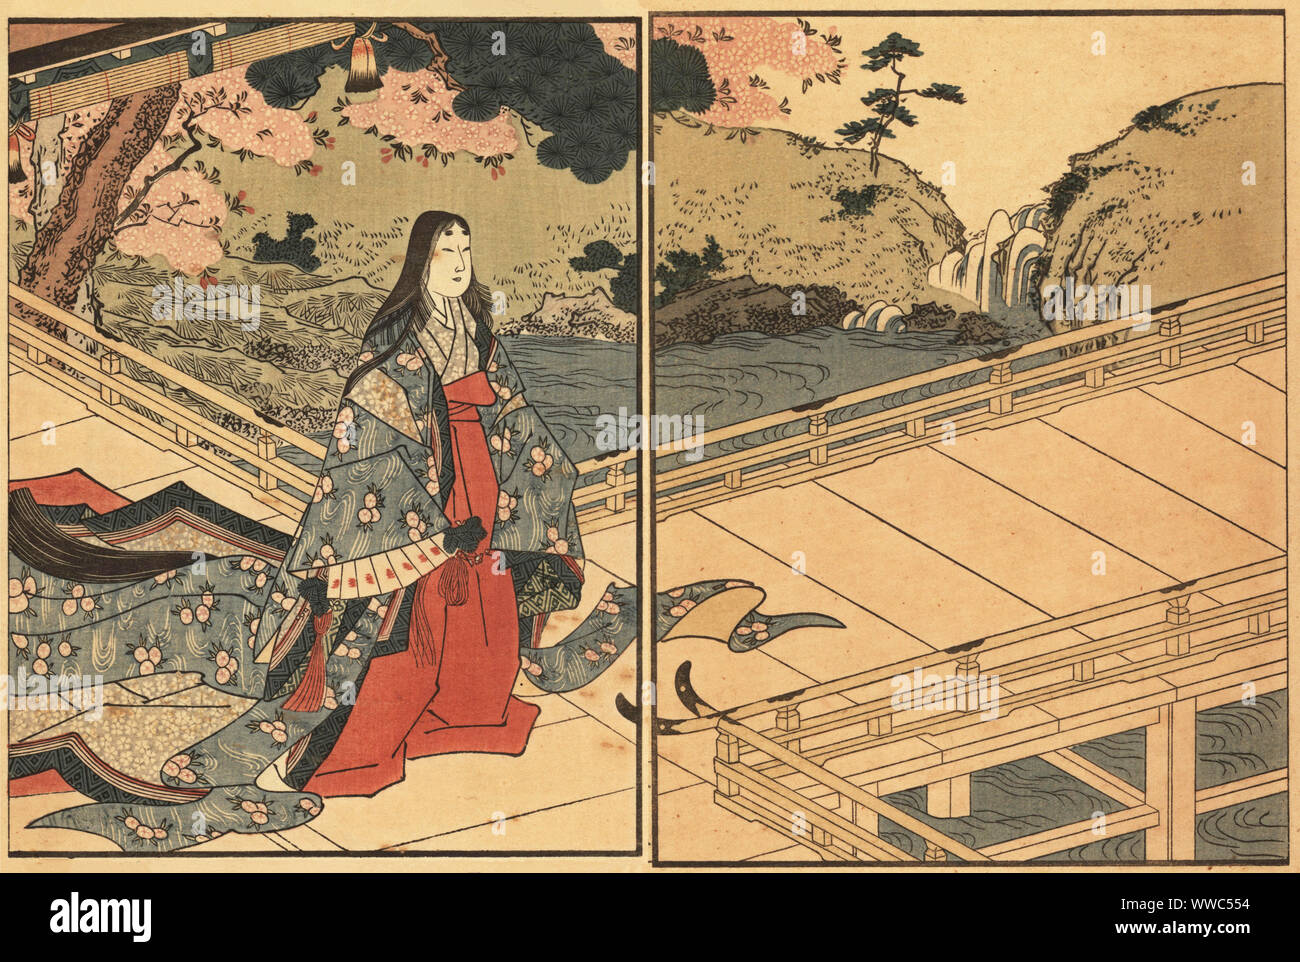 Woman of the nobility or courtier in silk kimono with cypress fan walking in a garden under cherry blossoms. Handcoloured ukiyo-e woodblock print by Toyokuni Utagawa from Shikitei Sanba’s Ehon Imayo Sugata (Picture Book of the Modern Forms and Figures, Tokyo, 1916. Reprint of the original from 1802. Stock Photo